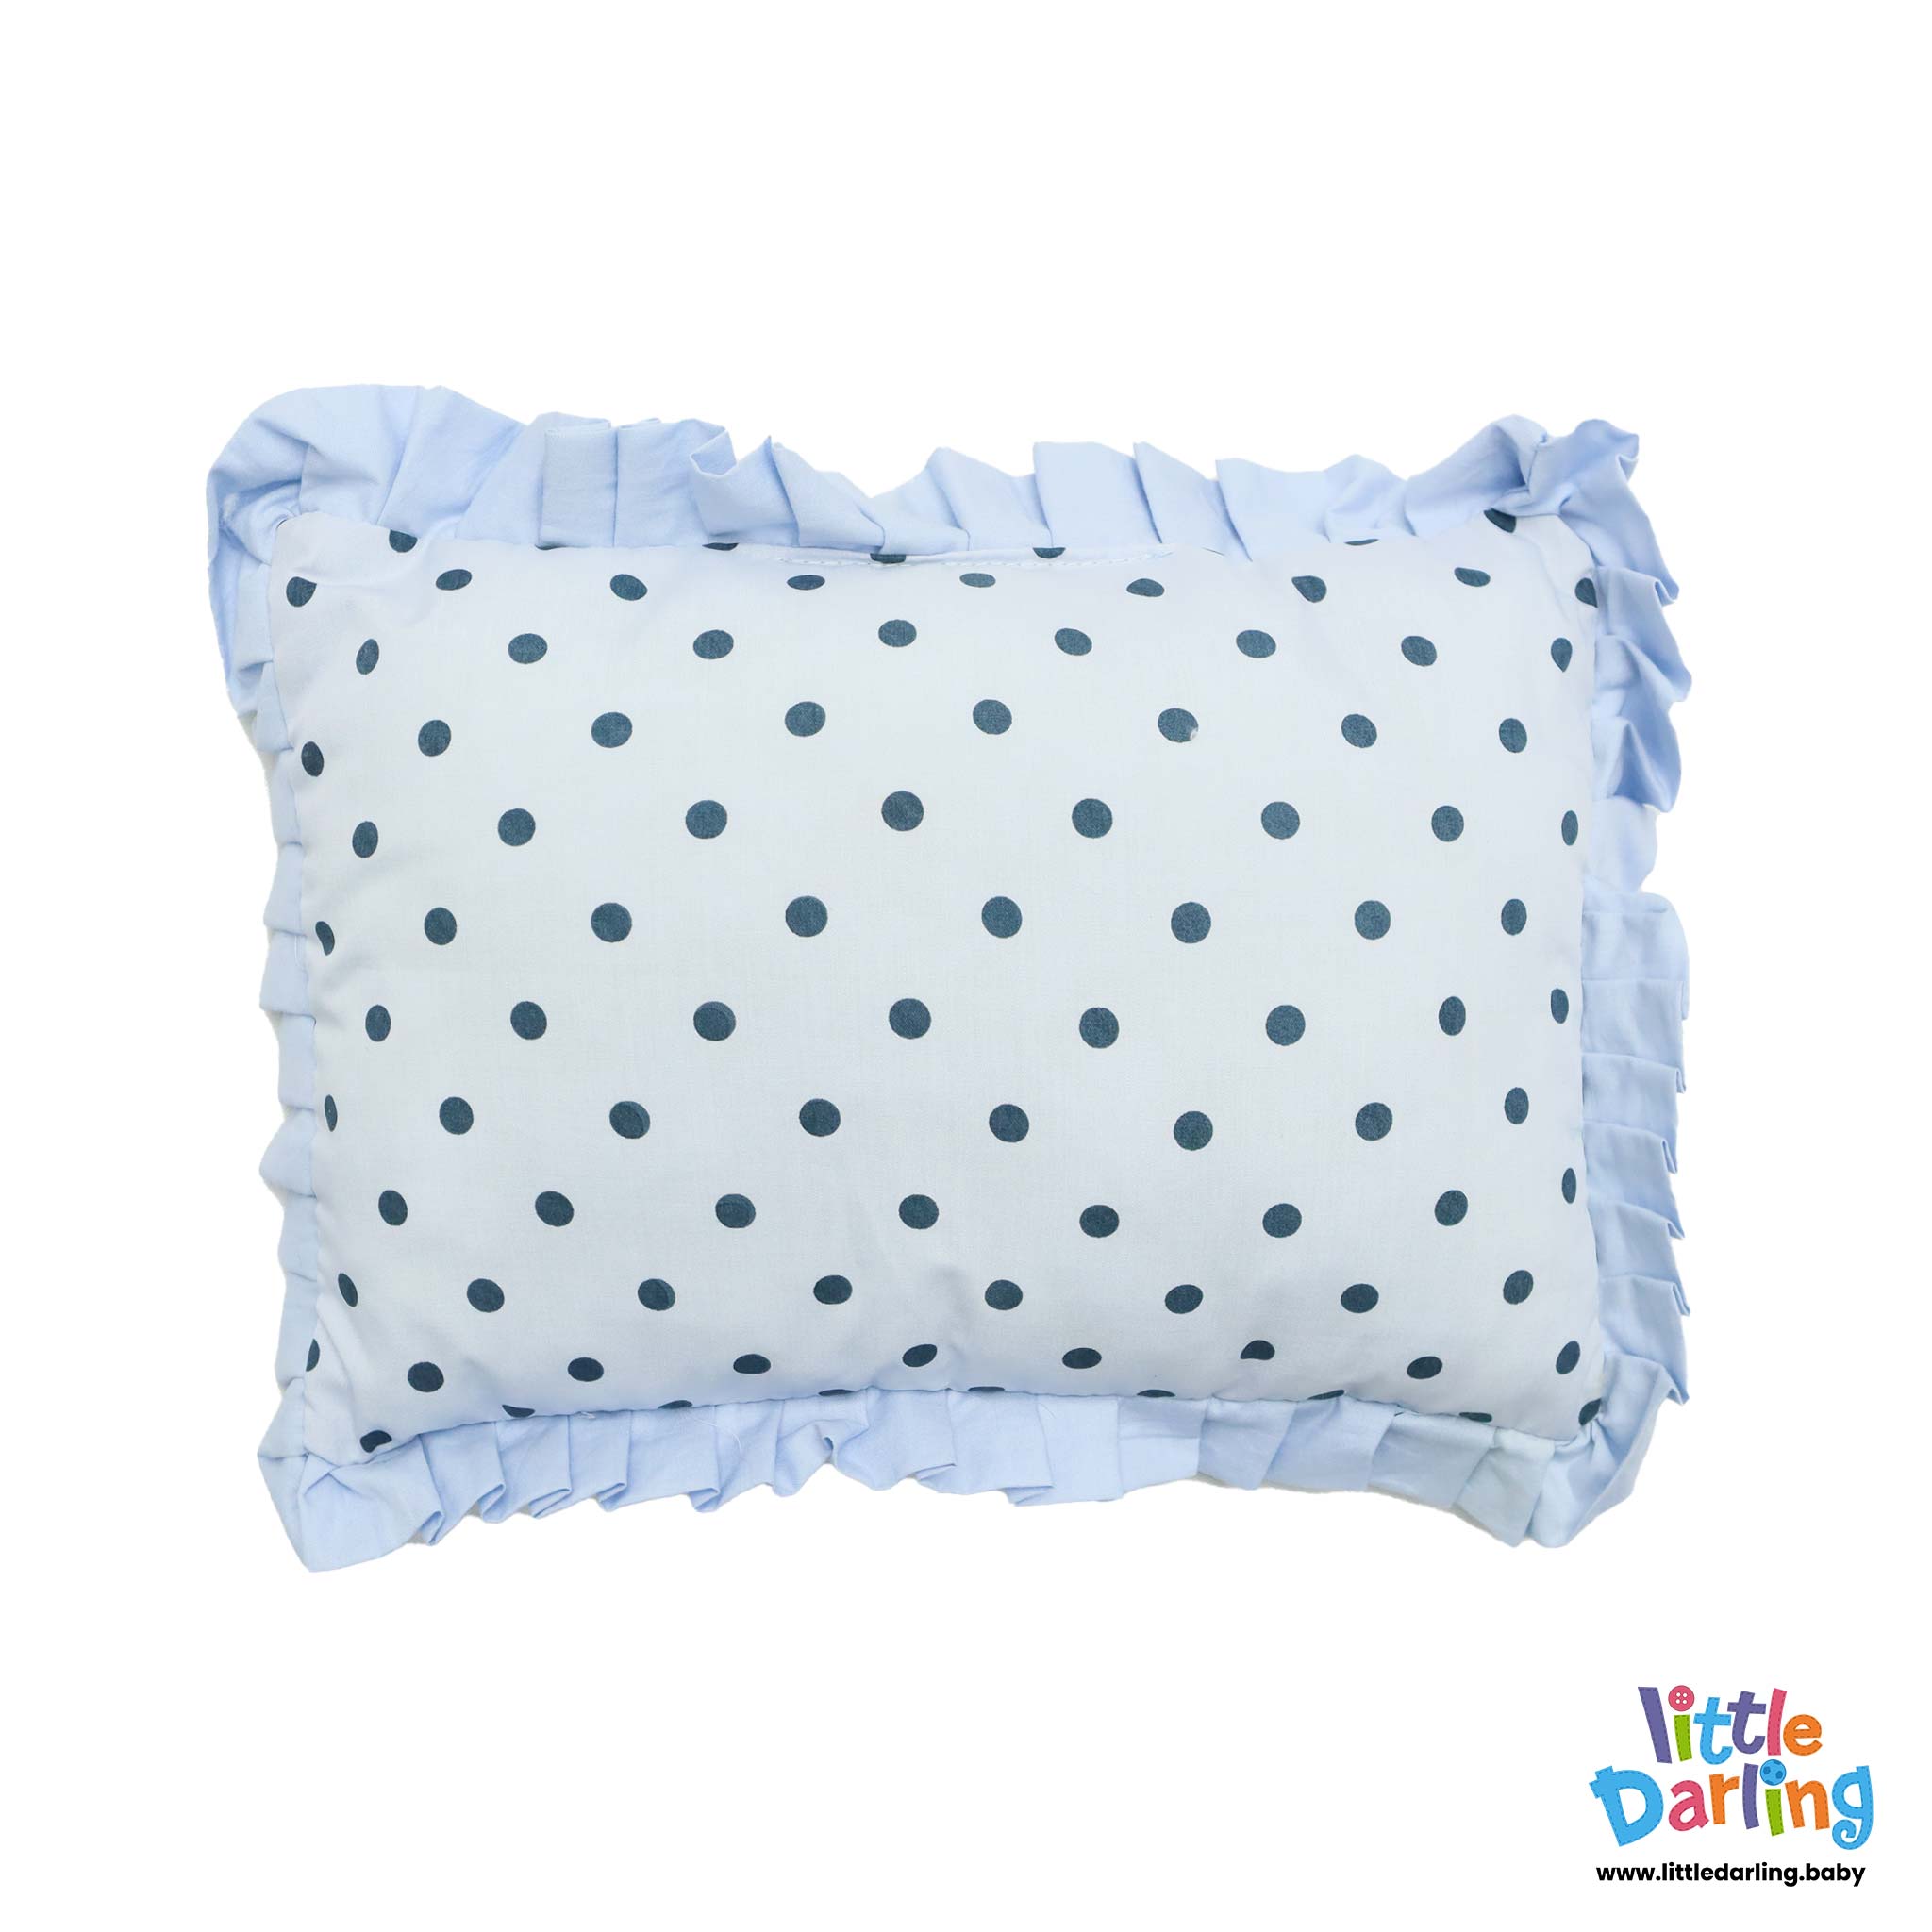 Baby Pillow Set Pk Of 3 Sky Blue Color by Little Darling